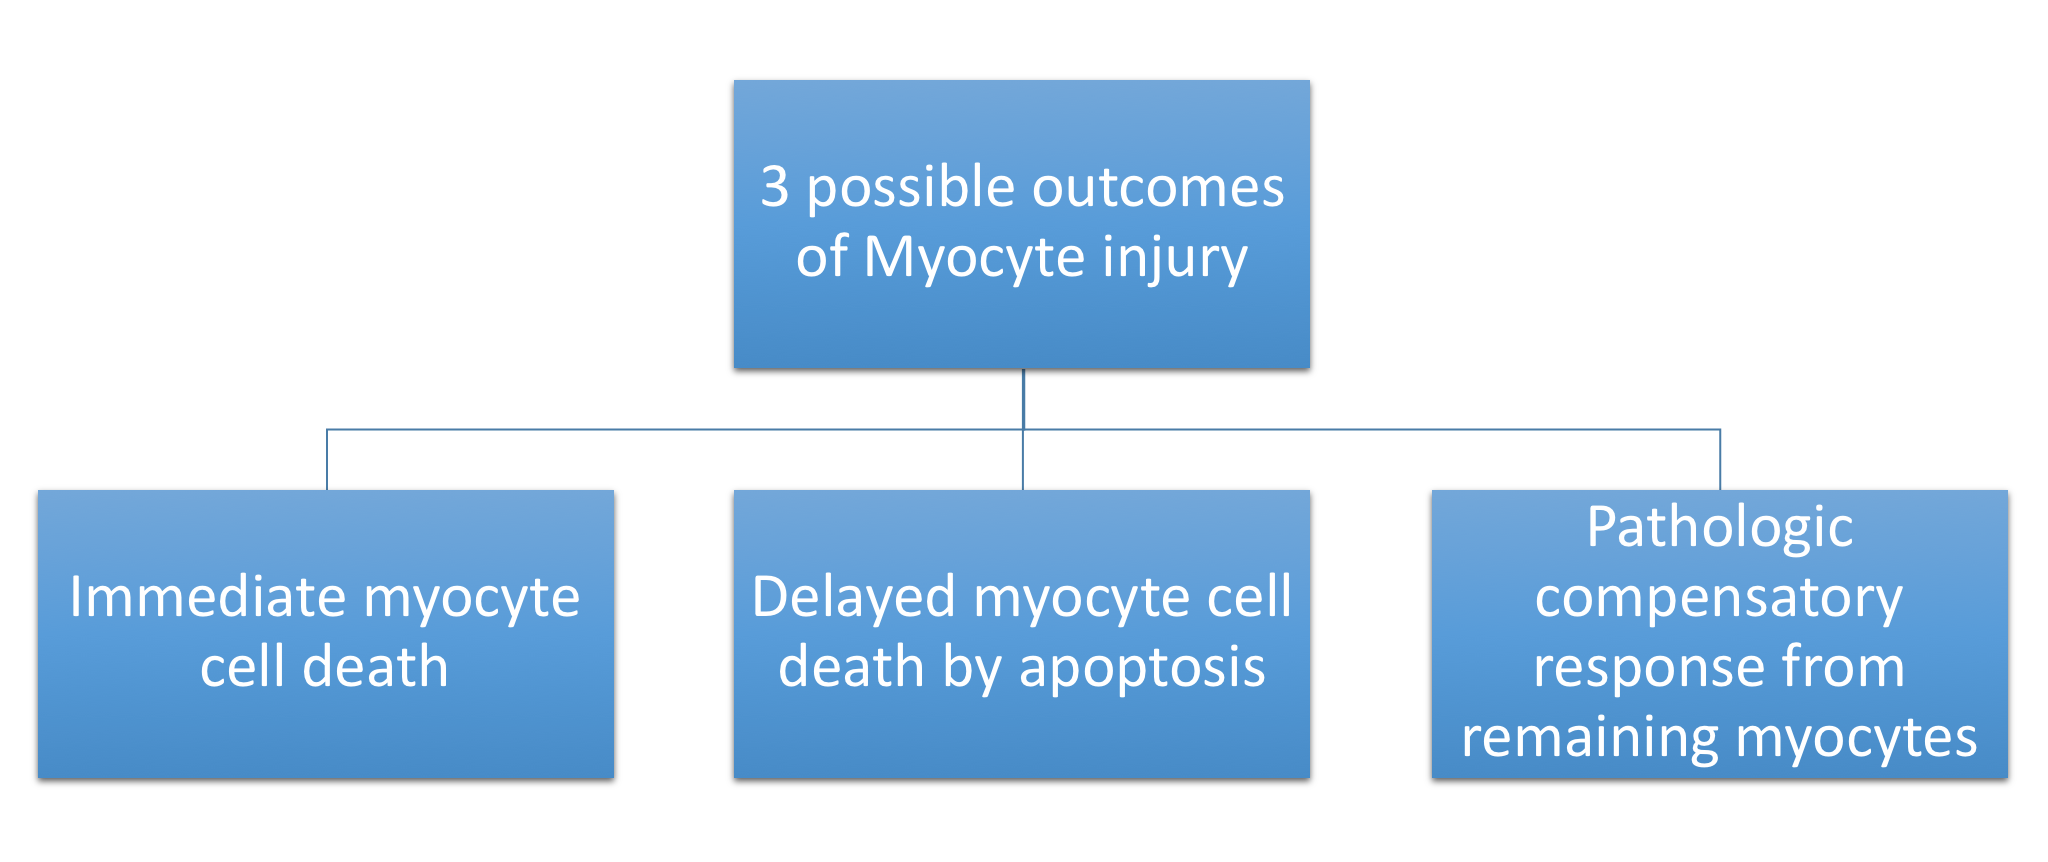 File:Most common outcomes of myocardial injury.png